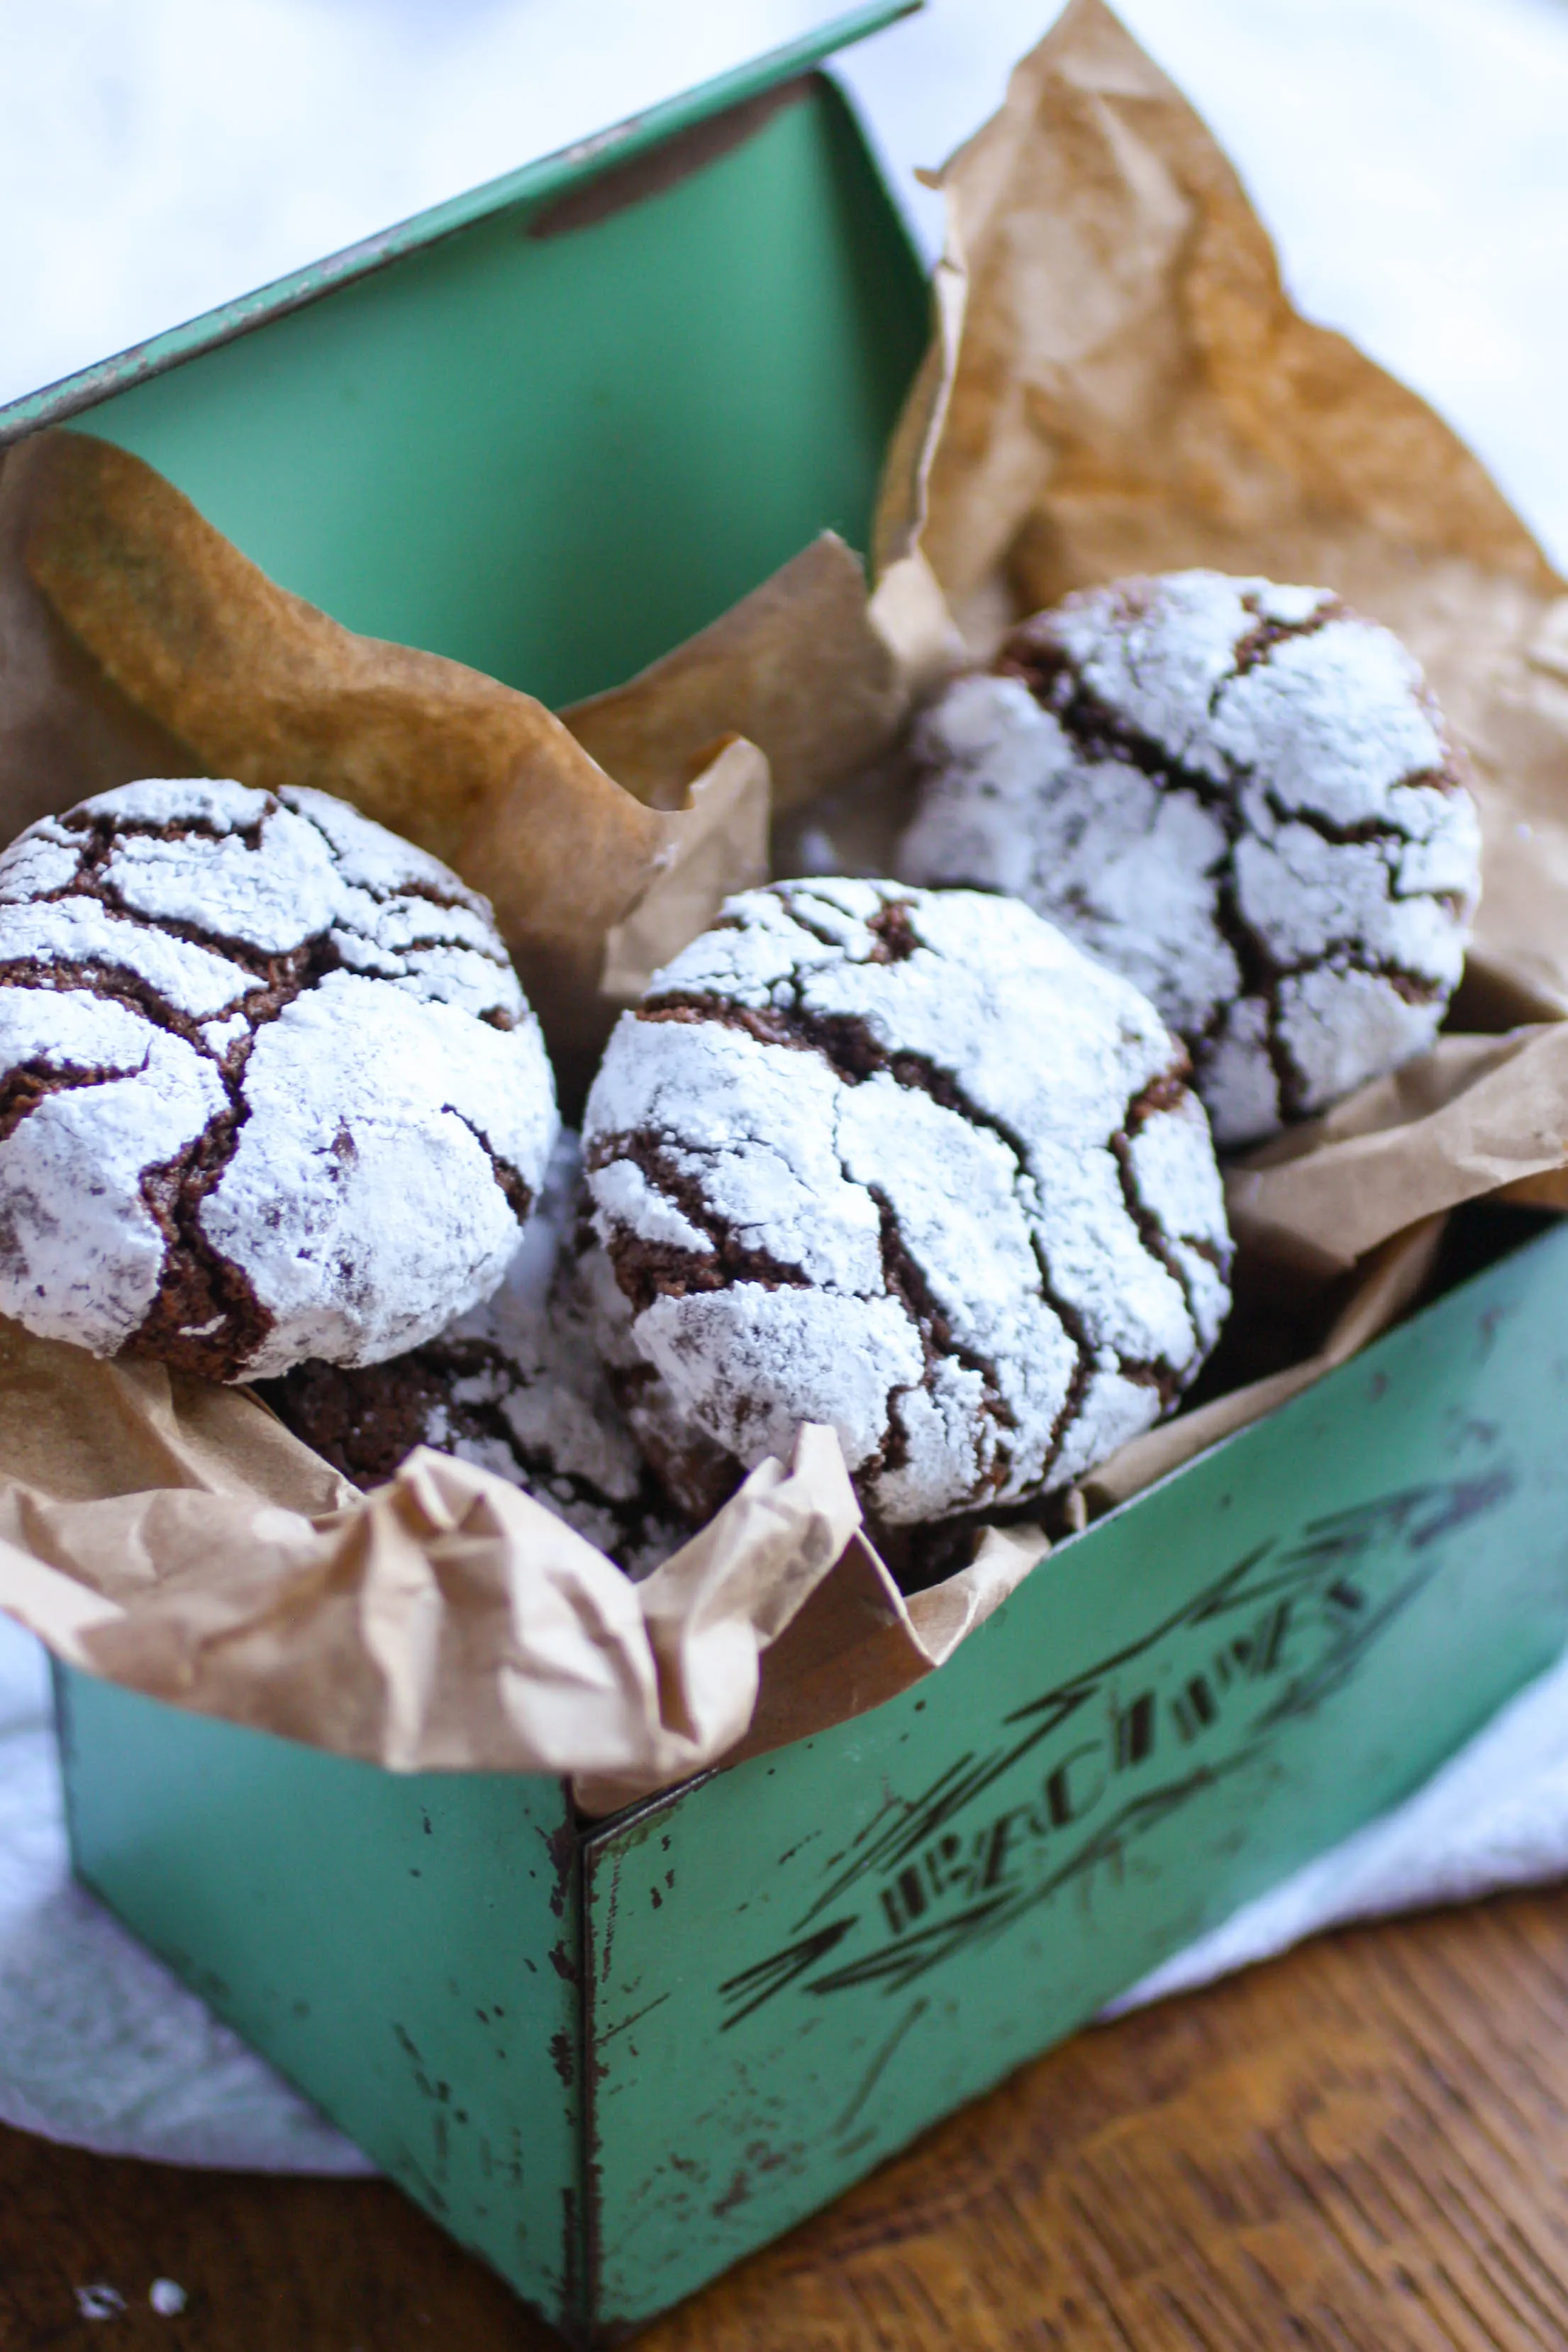 Chocolate-Chili Crinkle Cookies are a fun and rich treat. Serve these cookies anytime for a delightful treat!